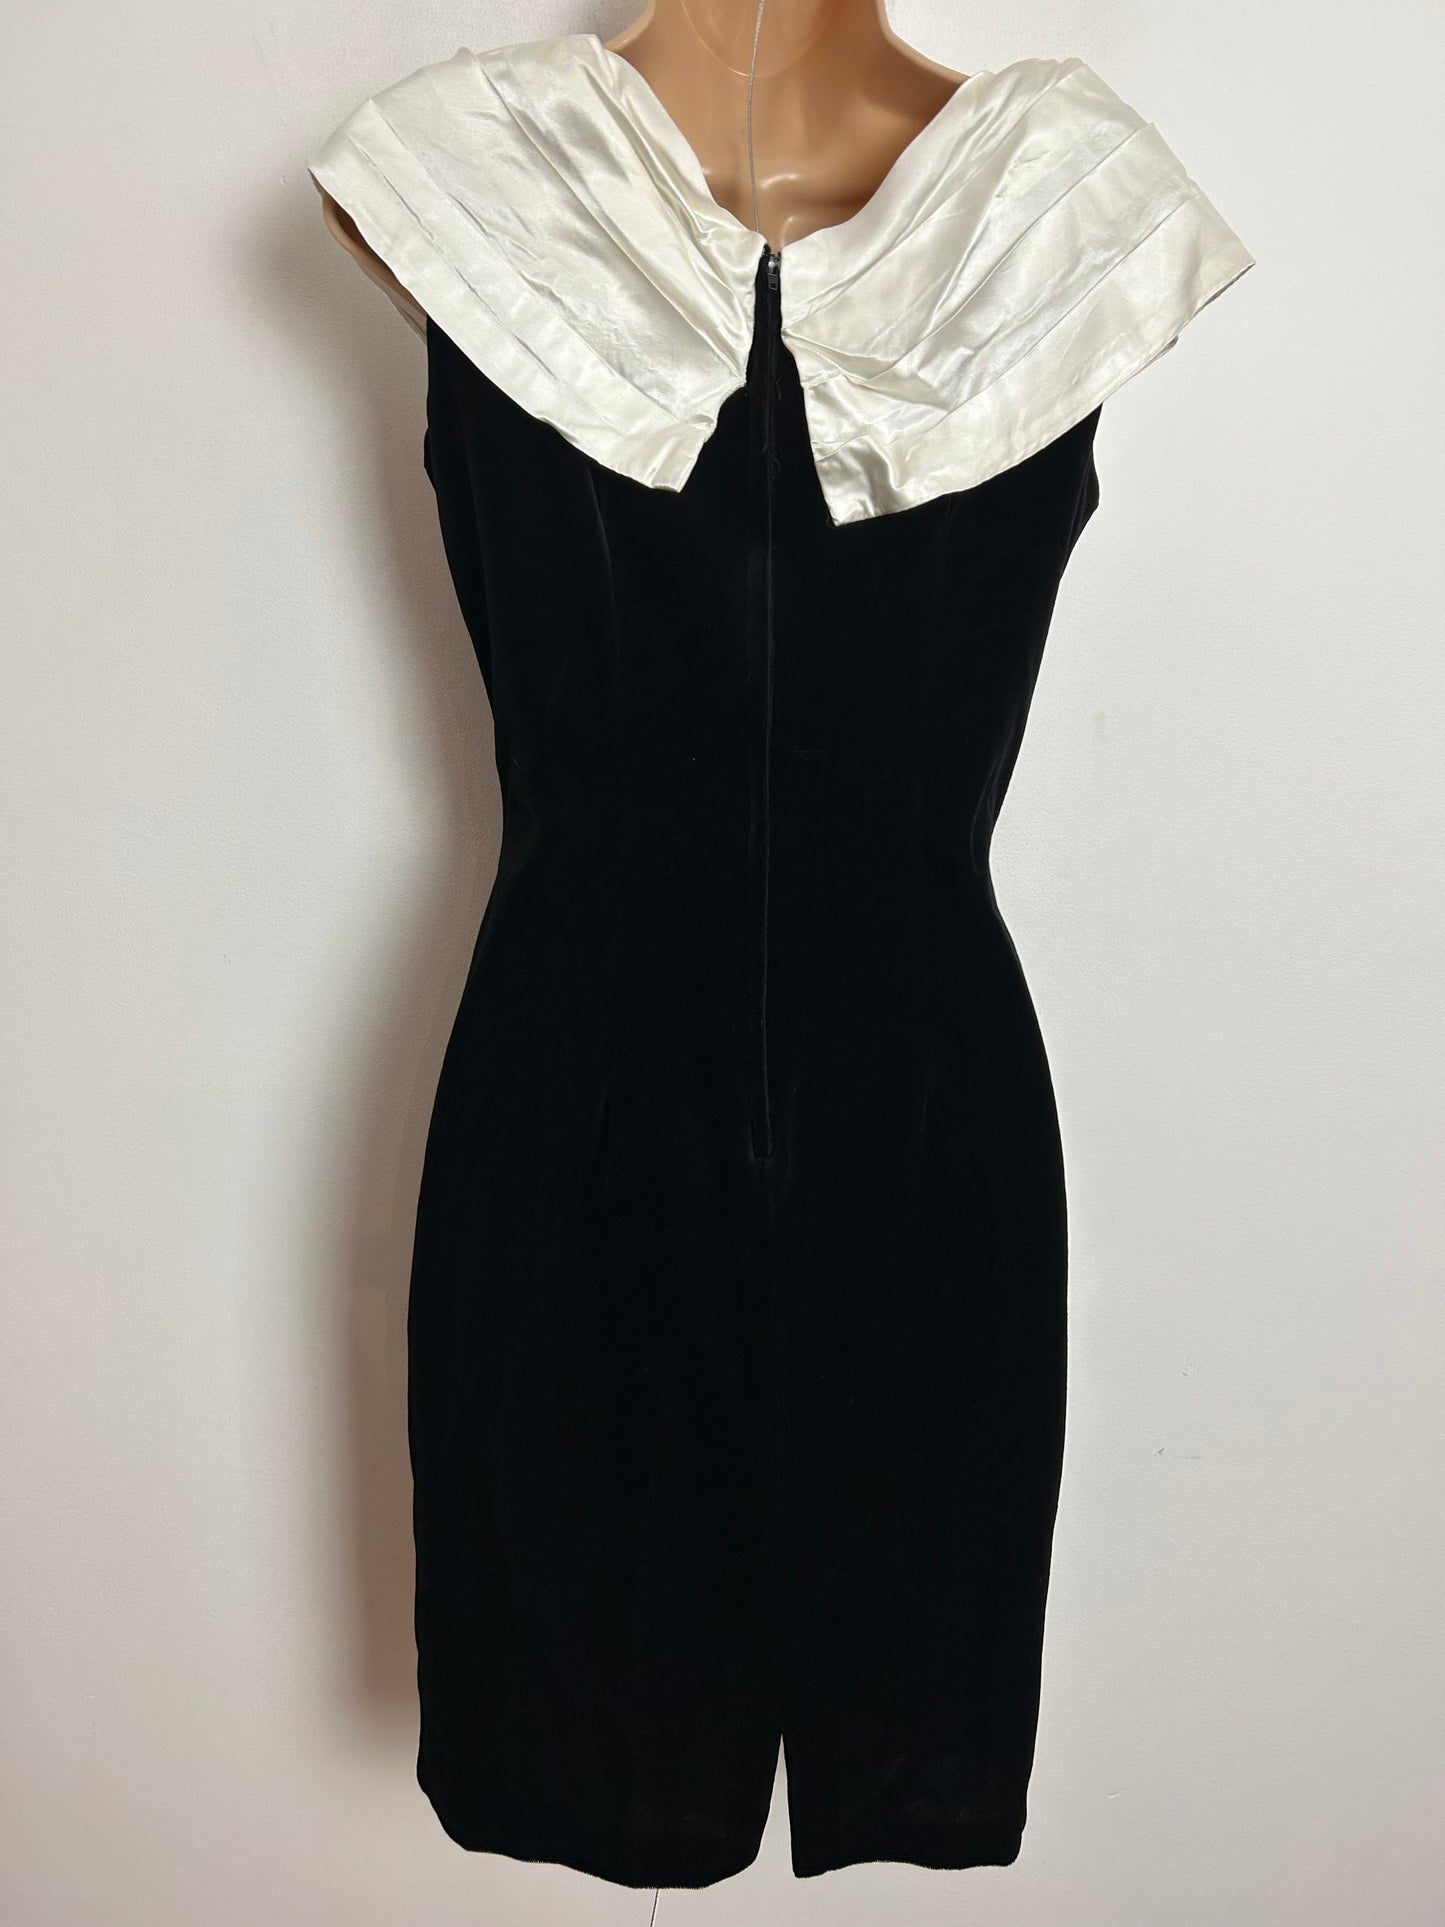 Vintage 1980s BHS UK Size 10 Black Velvet & Ivory White Bardot Diamante Detail Cocktail Fitted Wiggle Party Dress